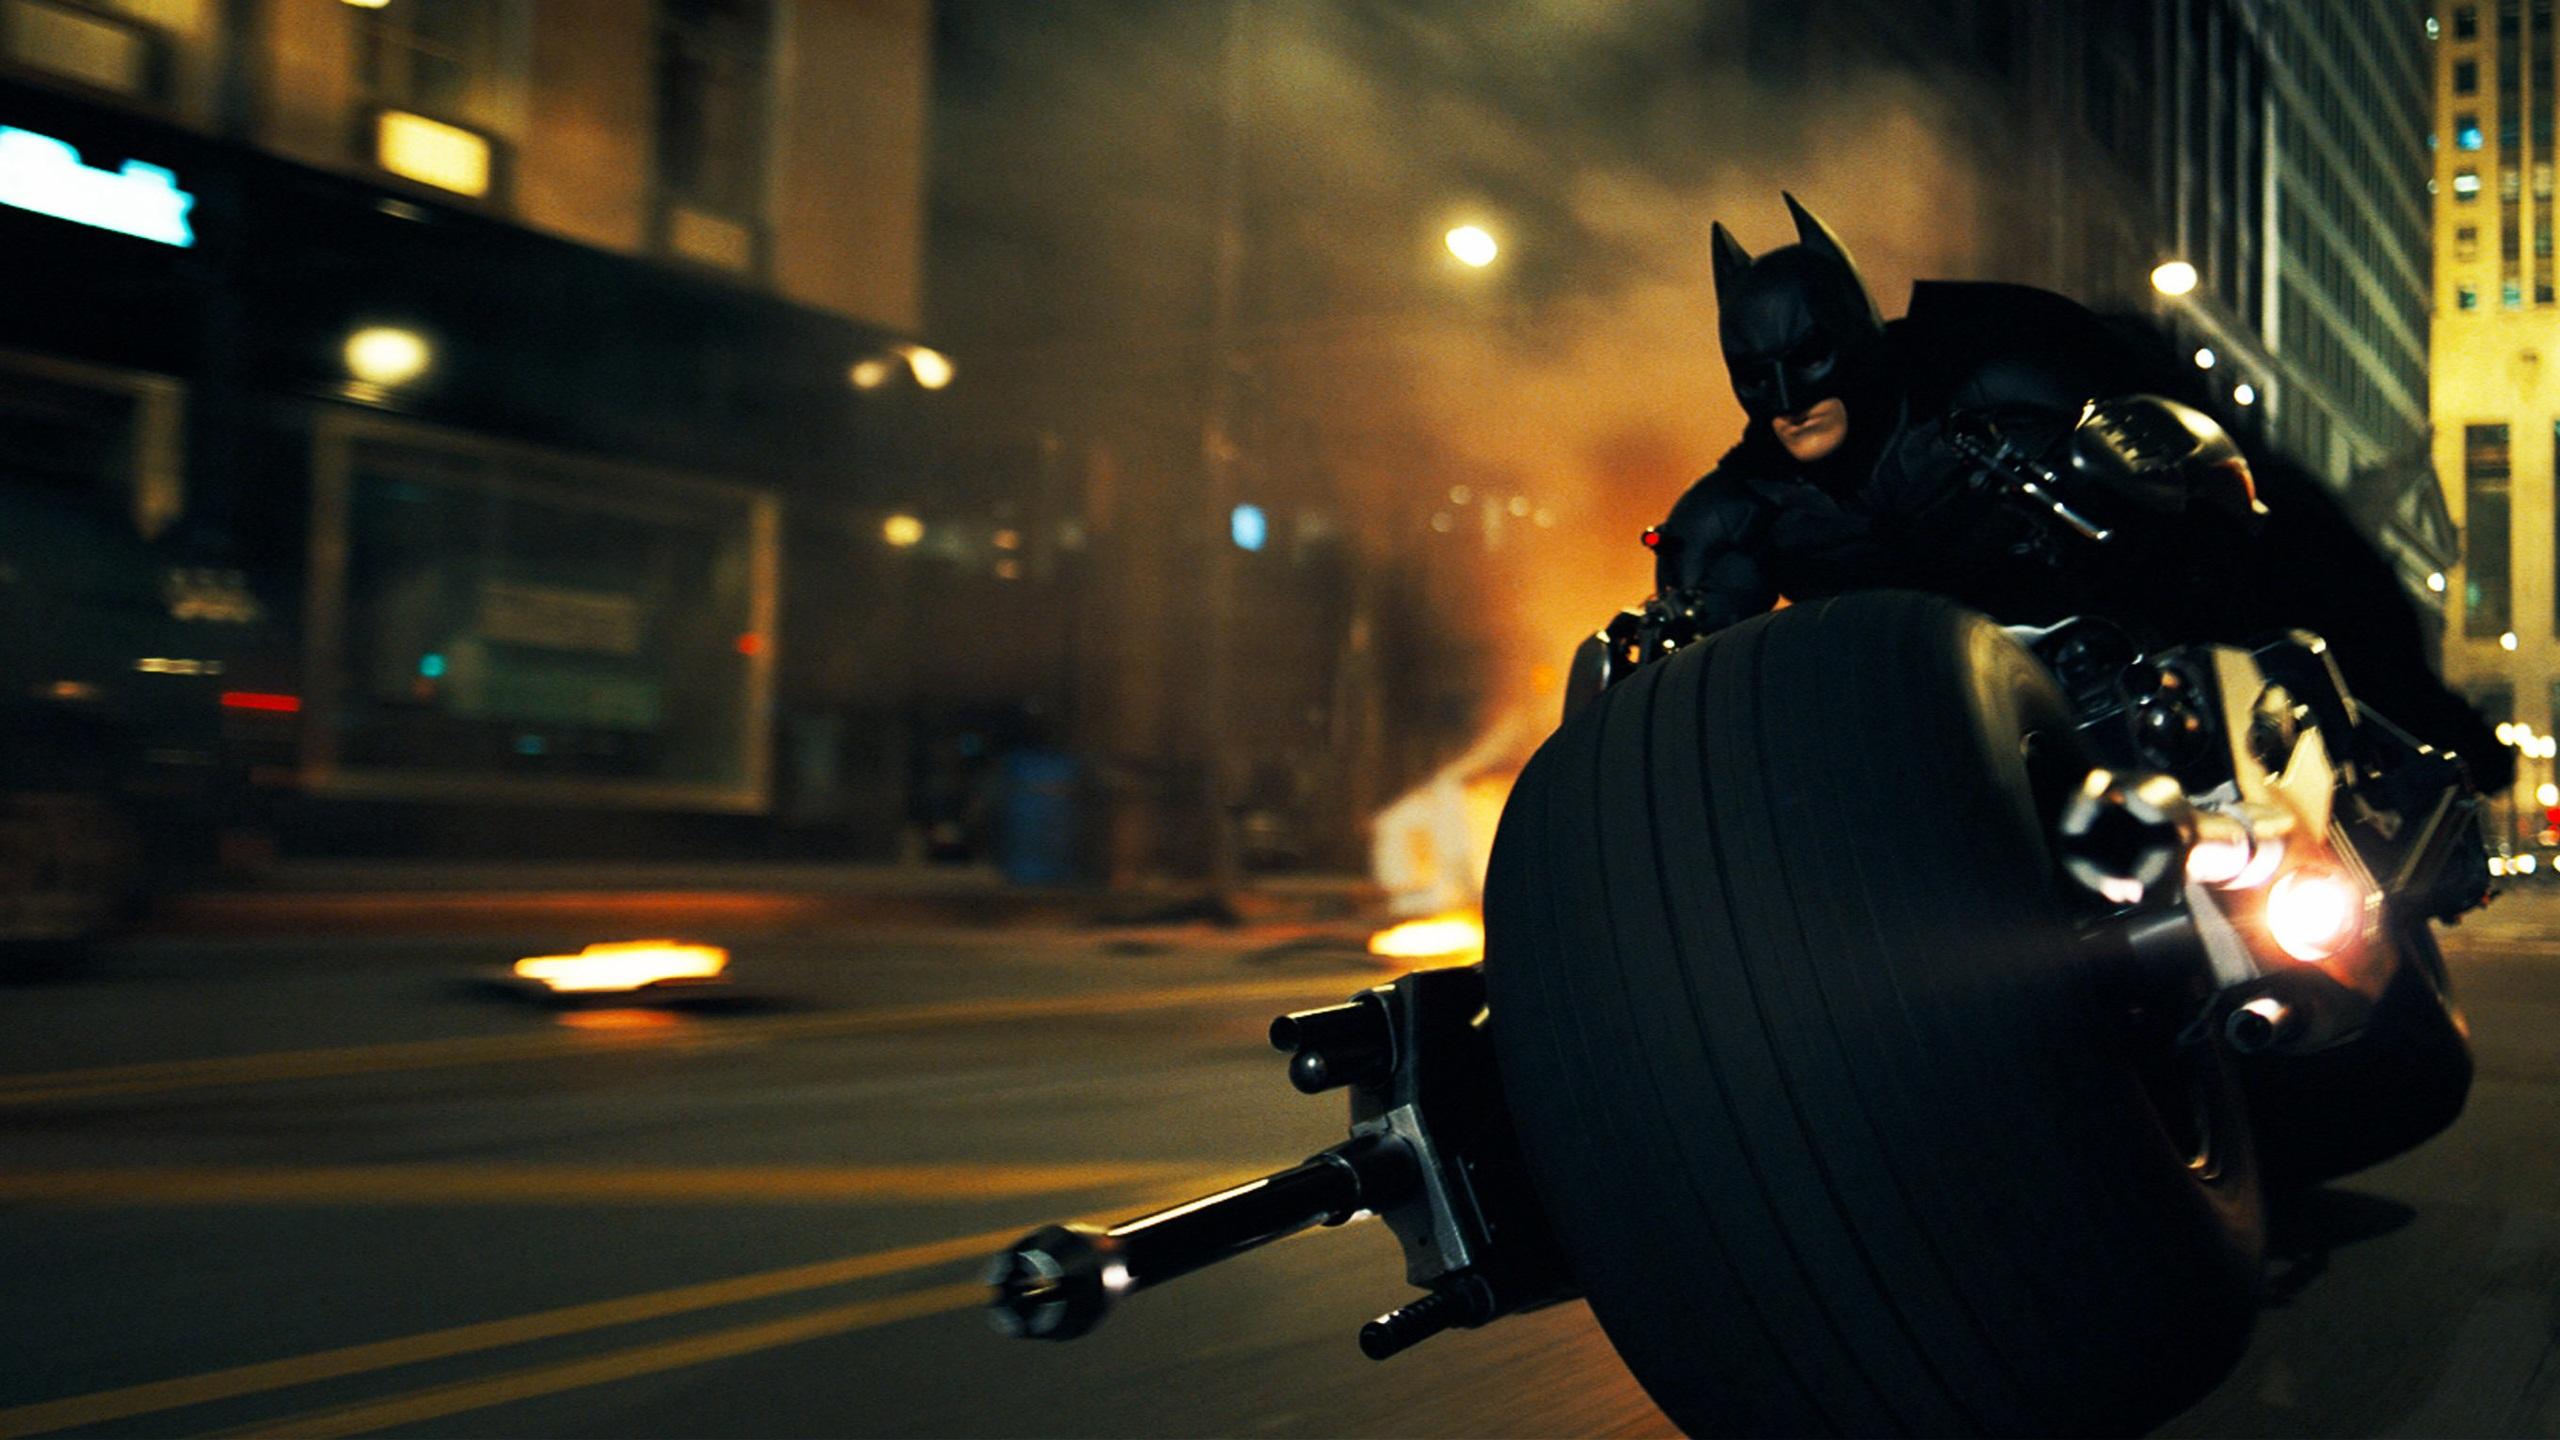 Dark Knight Hd Wallpapers For Mobile